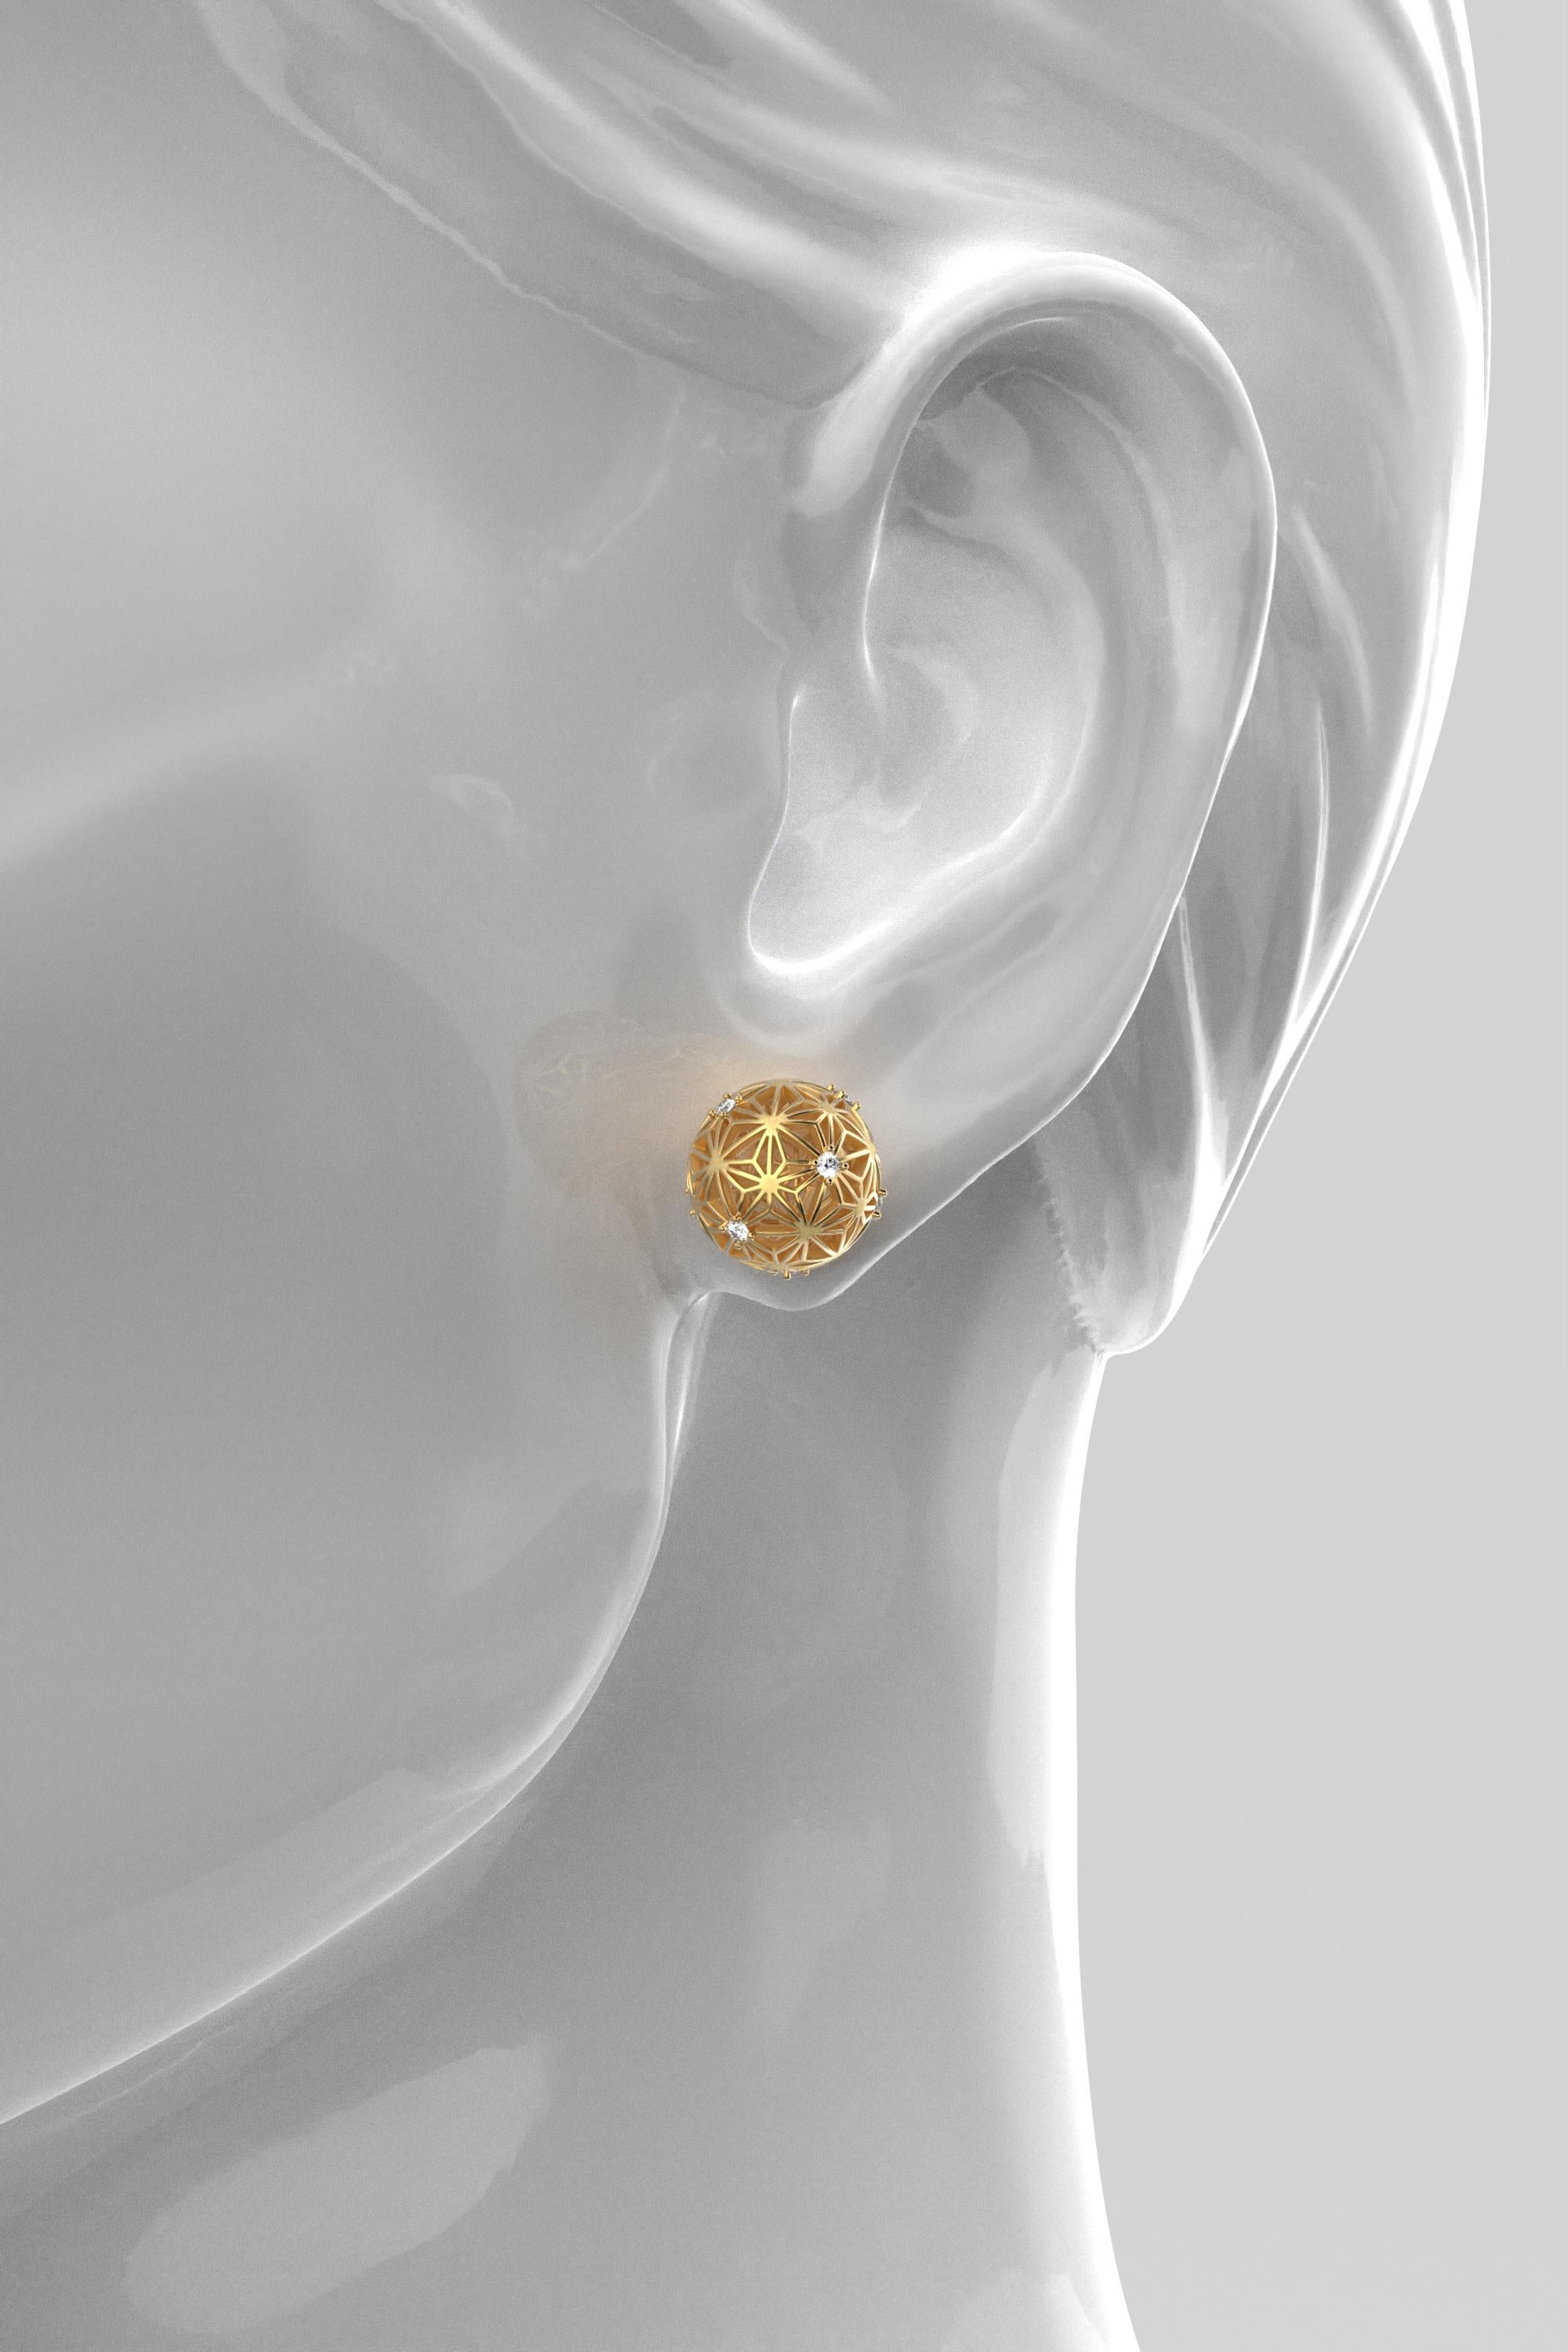 Discover timeless elegance with our made to order Italian-crafted 18k gold earrings, adorned with natural diamonds (G VS, 0.16 Ct Tw). Featuring a charming spherical design and intricate Sashiko star pattern openwork, these earrings exude